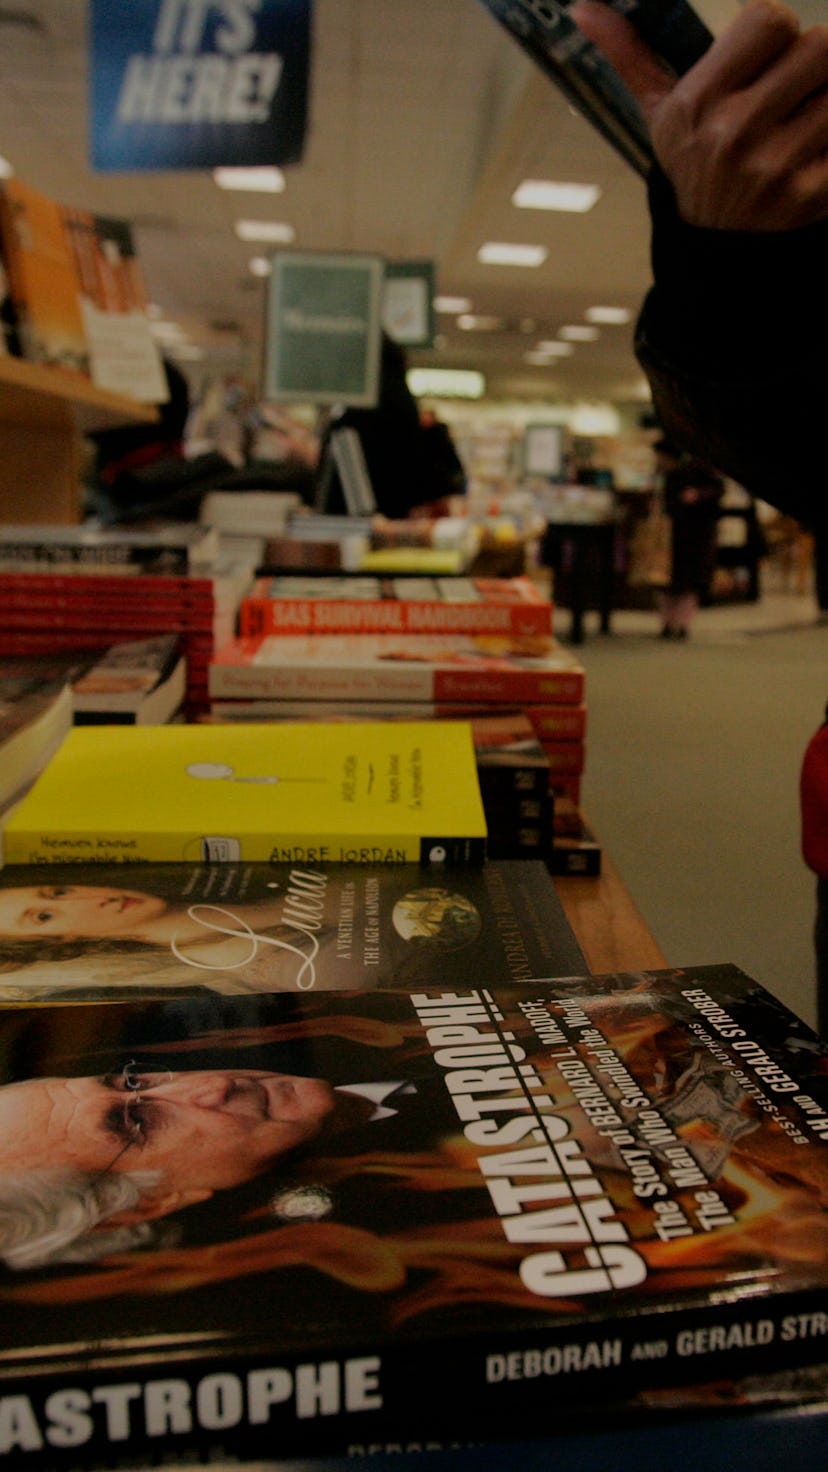 (031309 Boston, MA) A shopper looks over a book at a display table featuring copies of 'Catastrophe'...